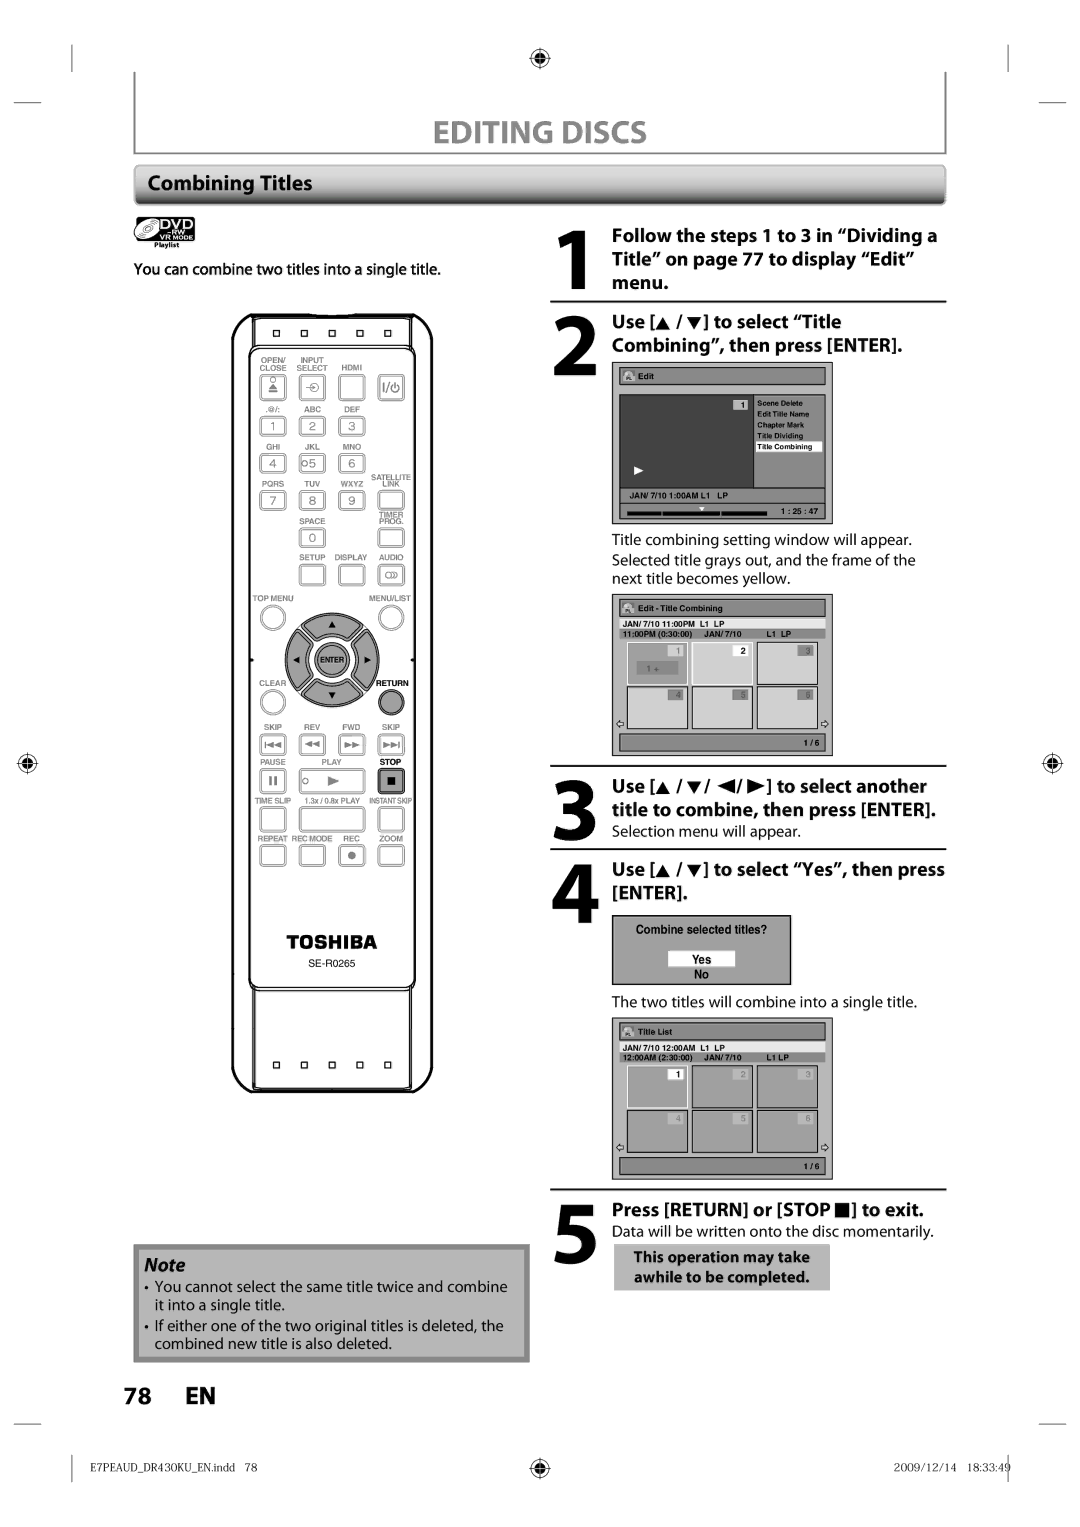 Toshiba DR430 owner manual Combining Titles, Menu, Use K / L to select Title Combining, then press Enter 